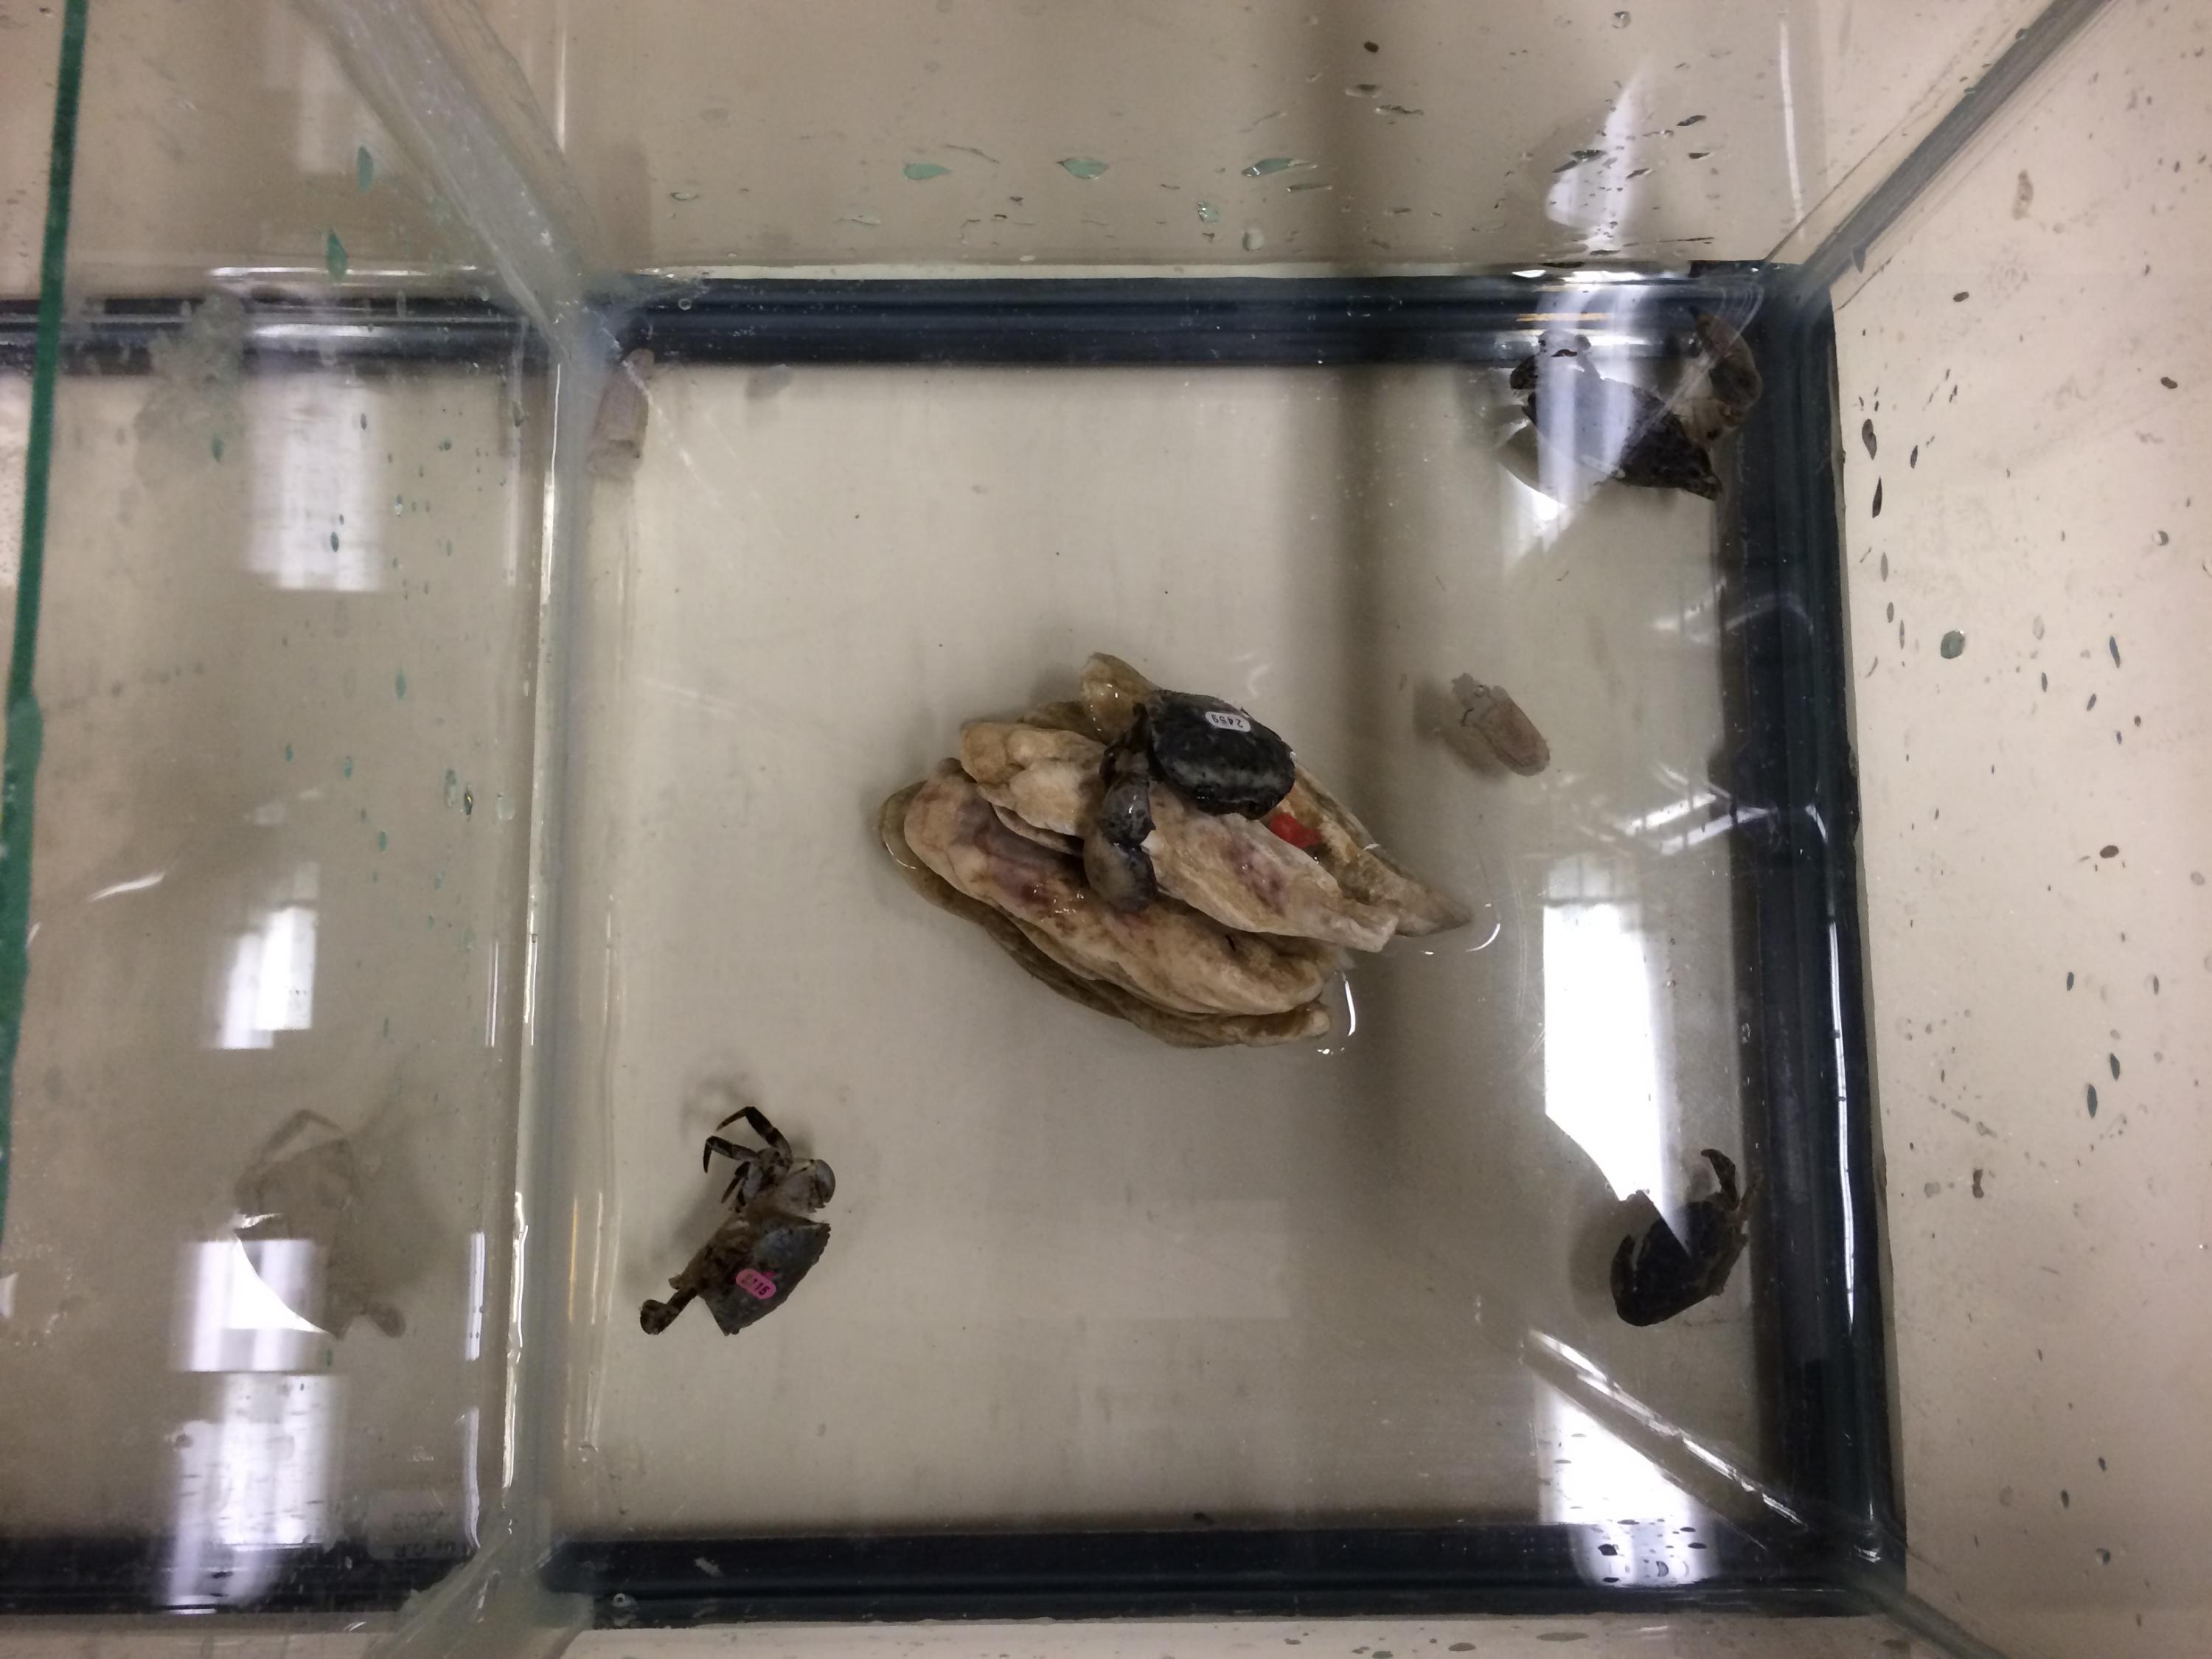 Mud crabs in an aquarium tank in a Georgia Tech lab. They are much smaller than blue crabs, which prey upon them. Credit: Georgia Tech / Remy Poulin